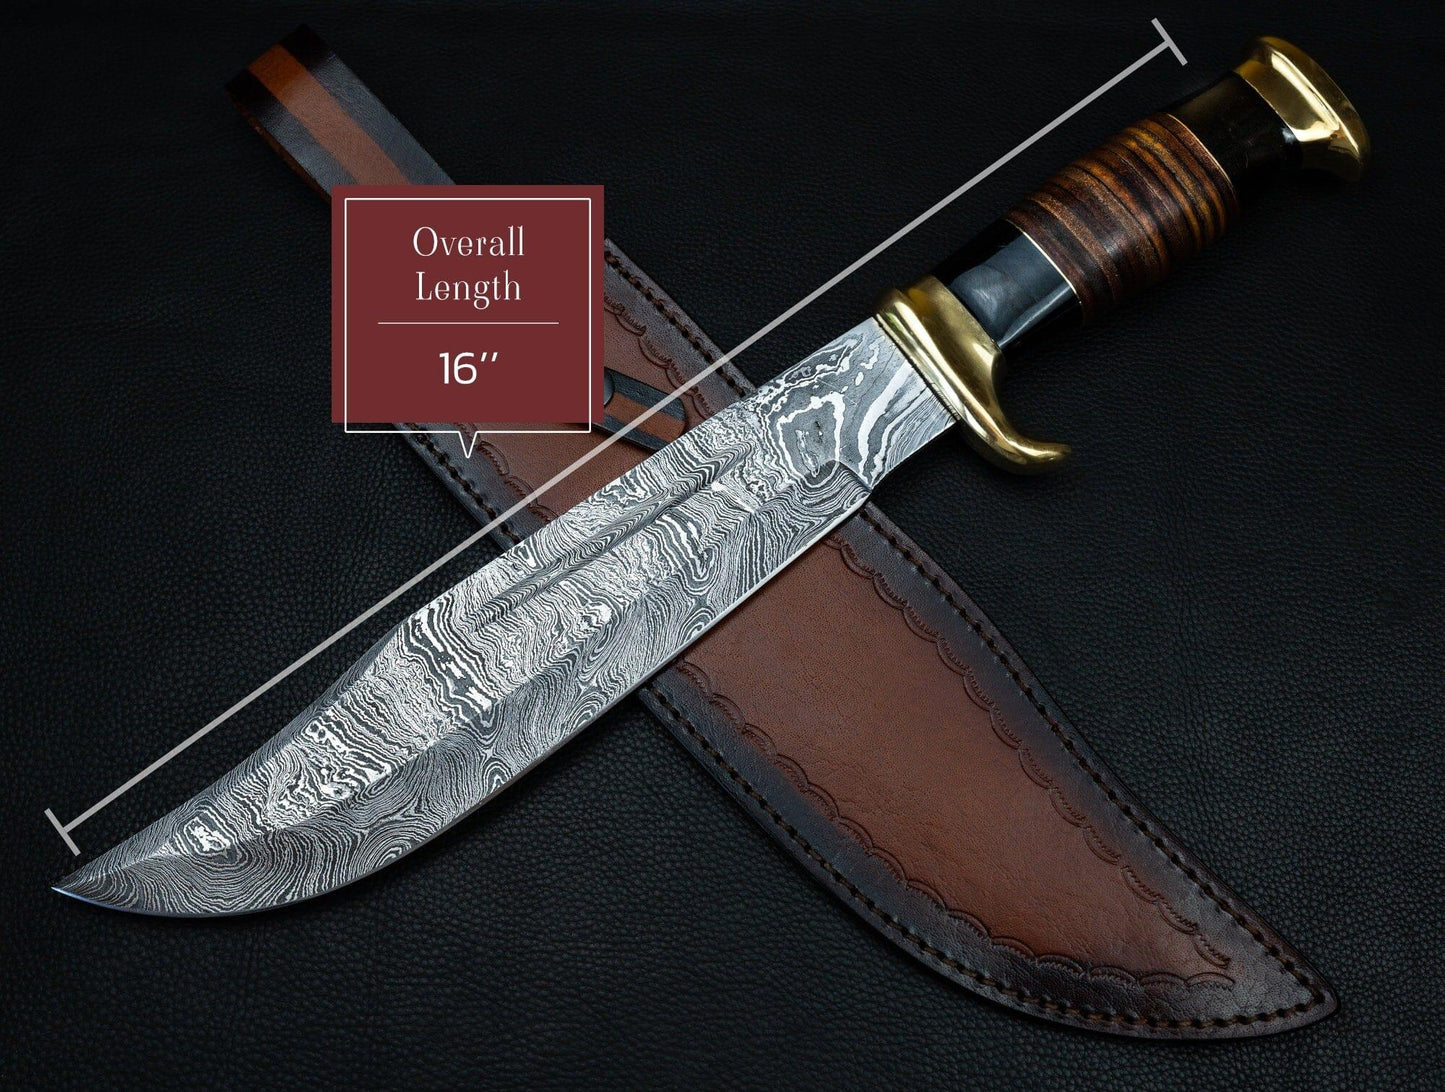 Bowie Knife - Handmade Forged Bowie Hunting Knife - Damascus Steel